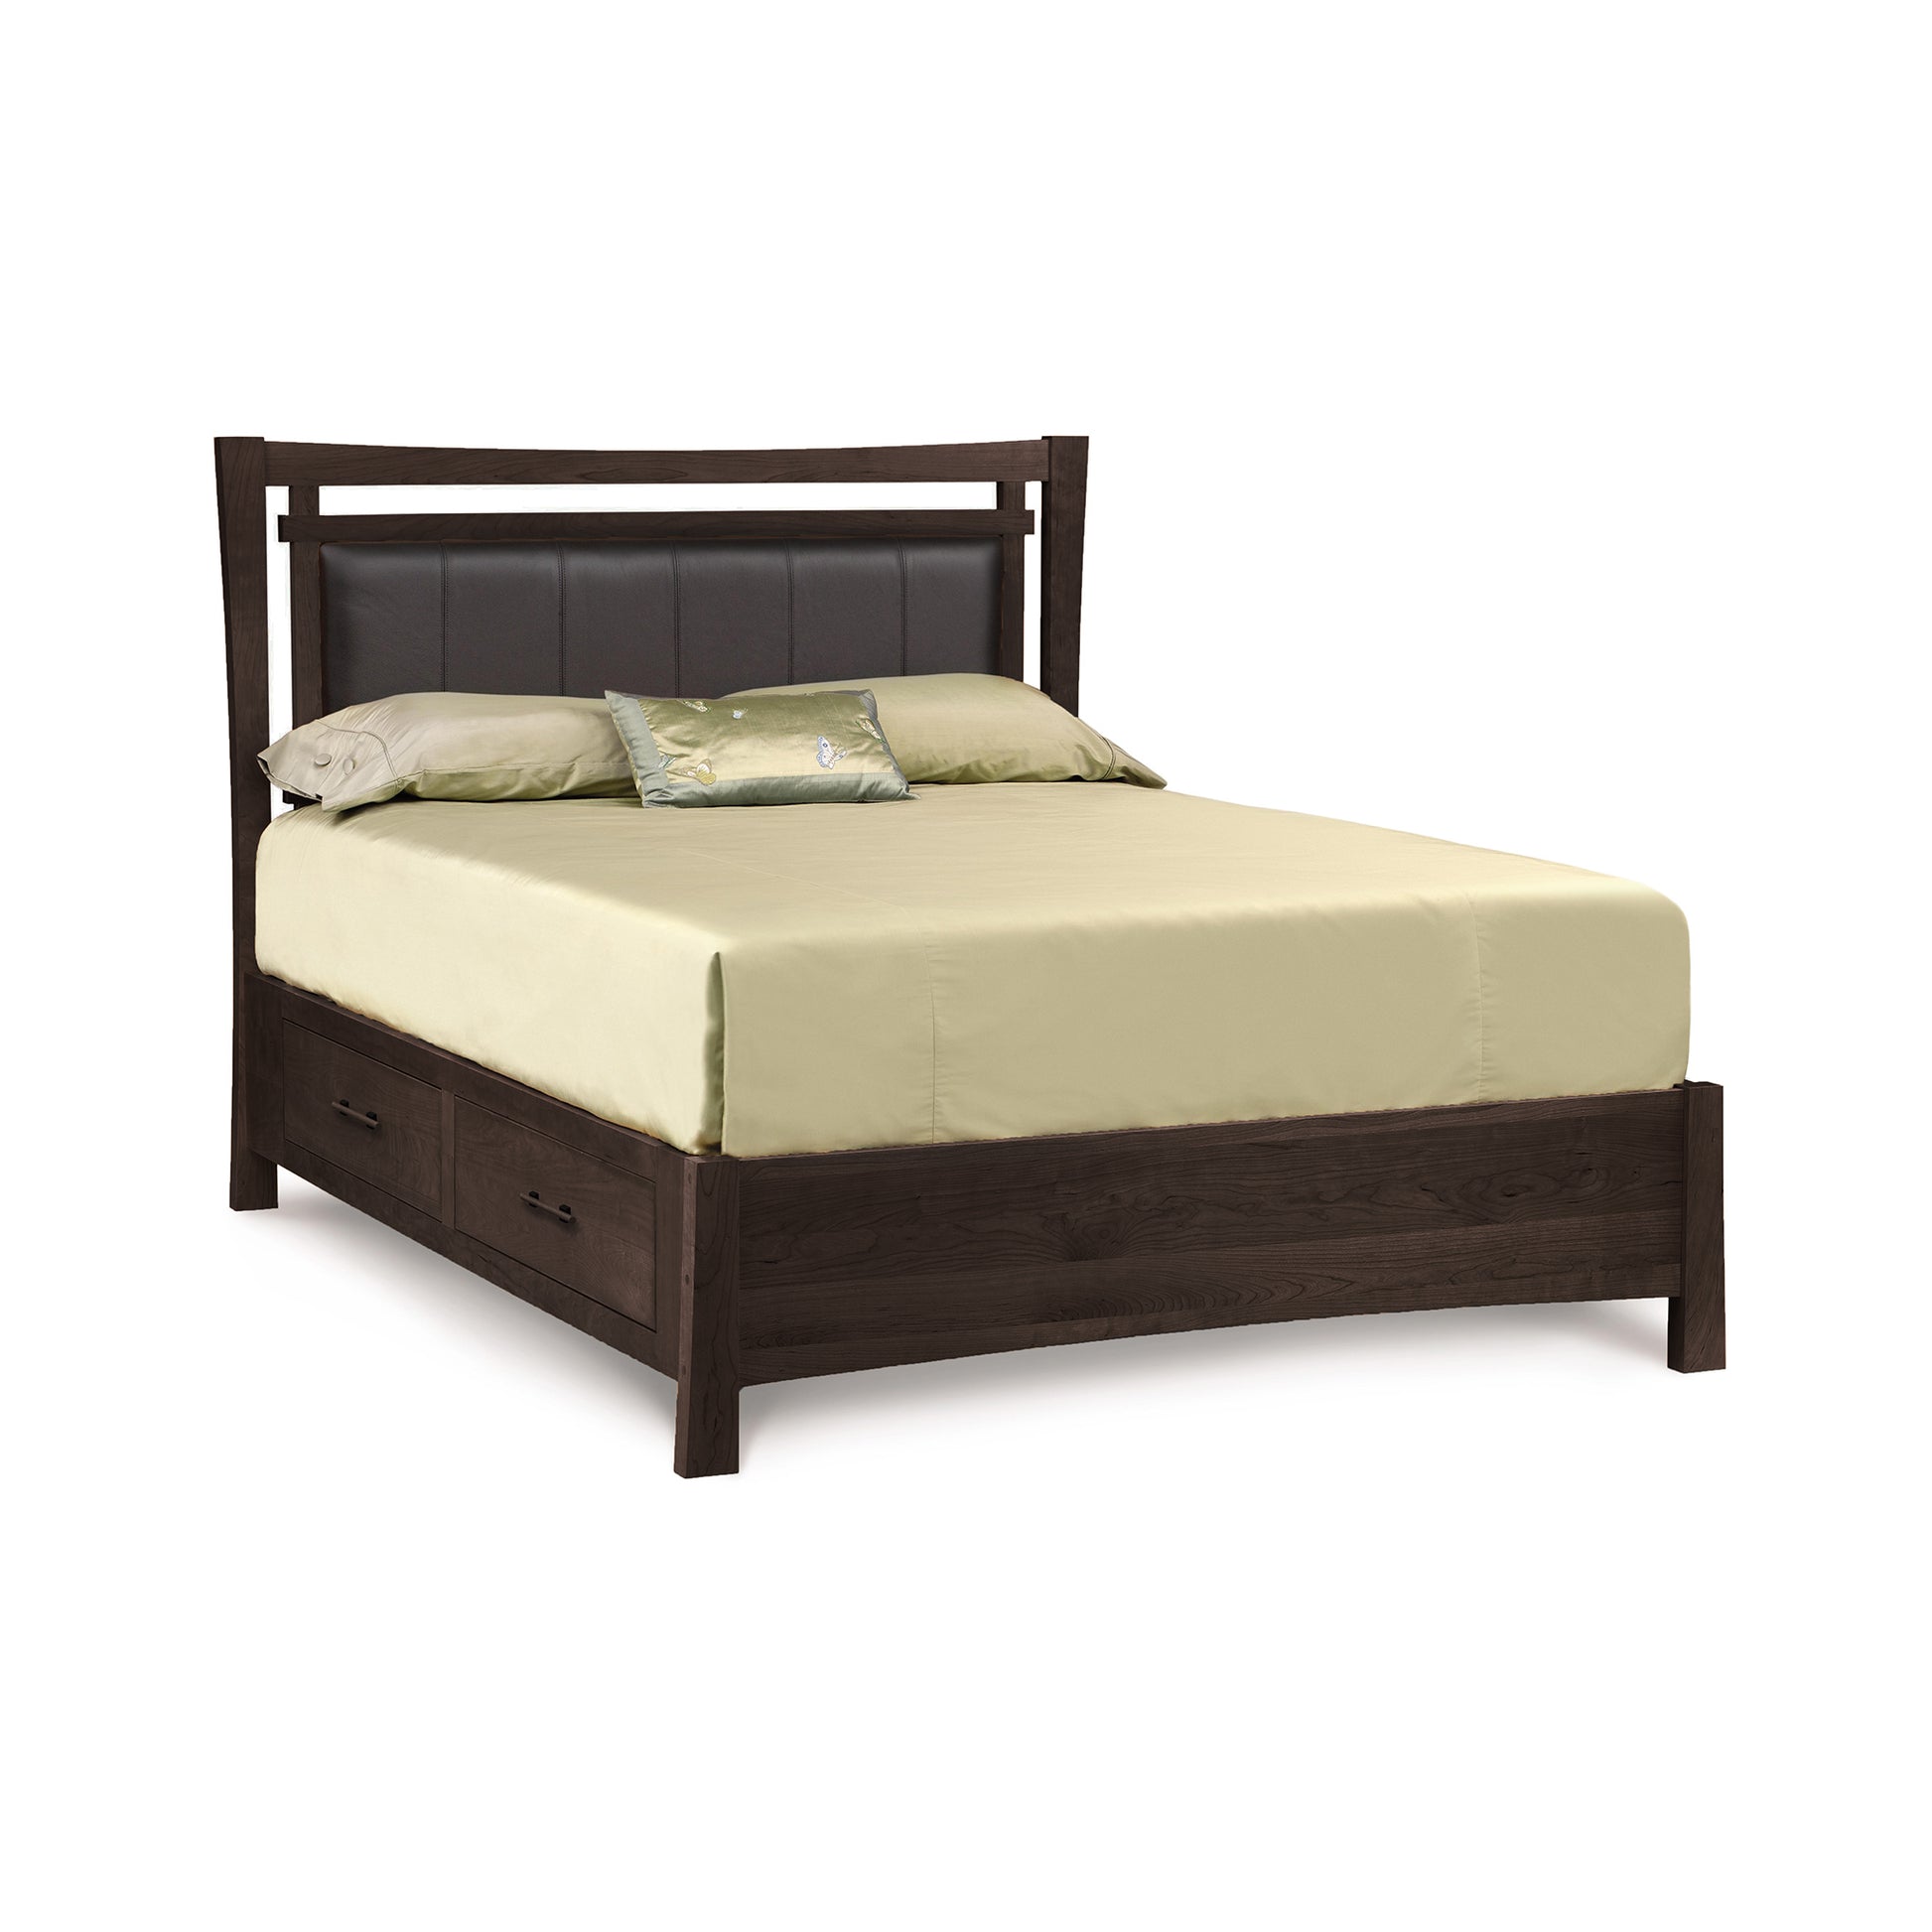 A modern Monterey Storage Bed with Upholstered Headboard by Copeland Furniture, featuring a leather-upholstered headboard and equipped with under-bed storage drawers on one side, made up with a light-colored bedsheet.